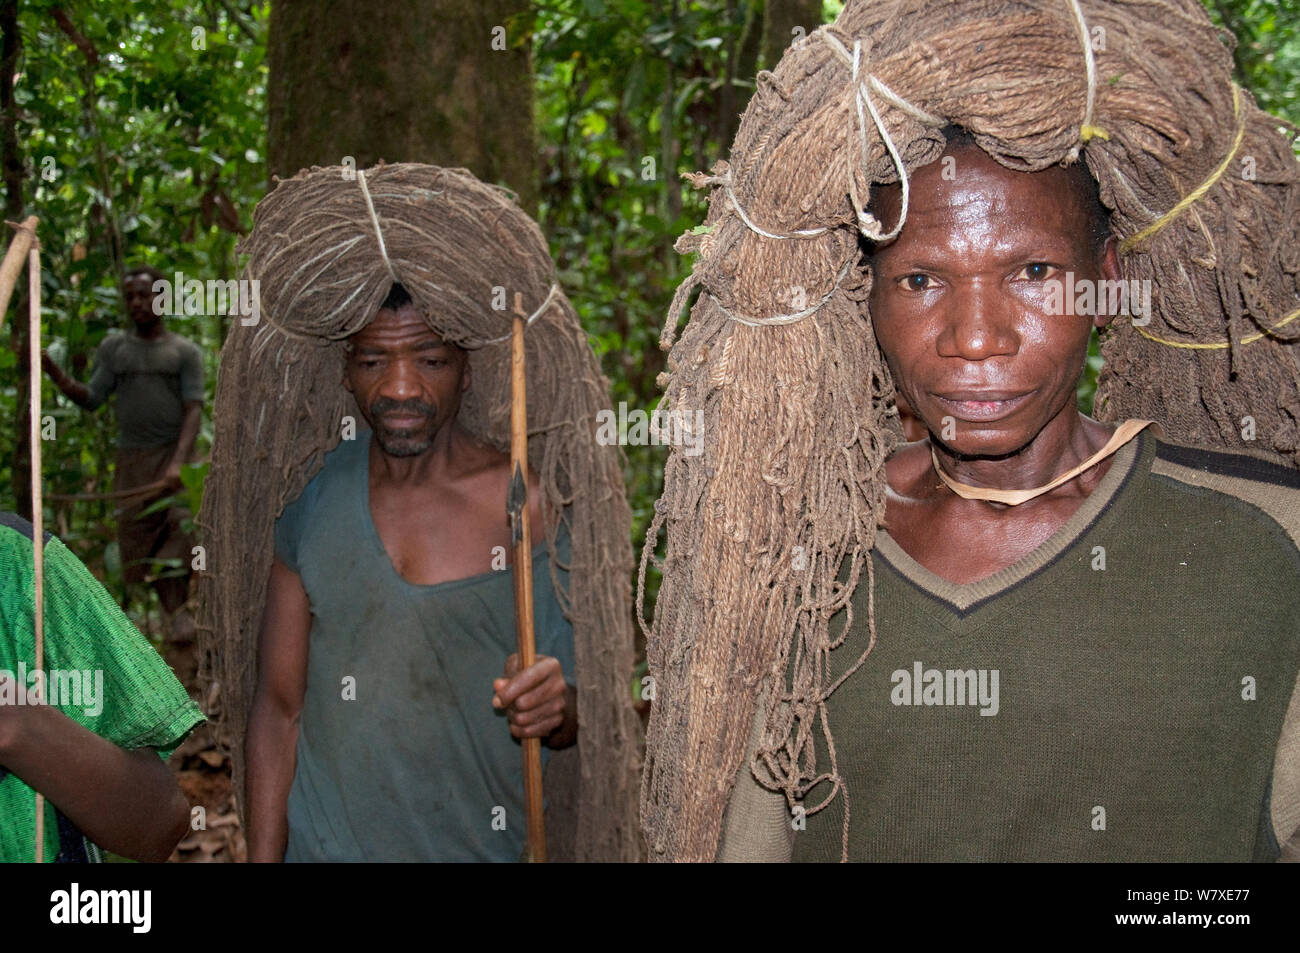 Mbuti Pygmy men carrying throwing nets on head for initiation hunt, Ituri Rainforest, Democratic Republic of the Congo, Africa, November 2011. Stock Photo